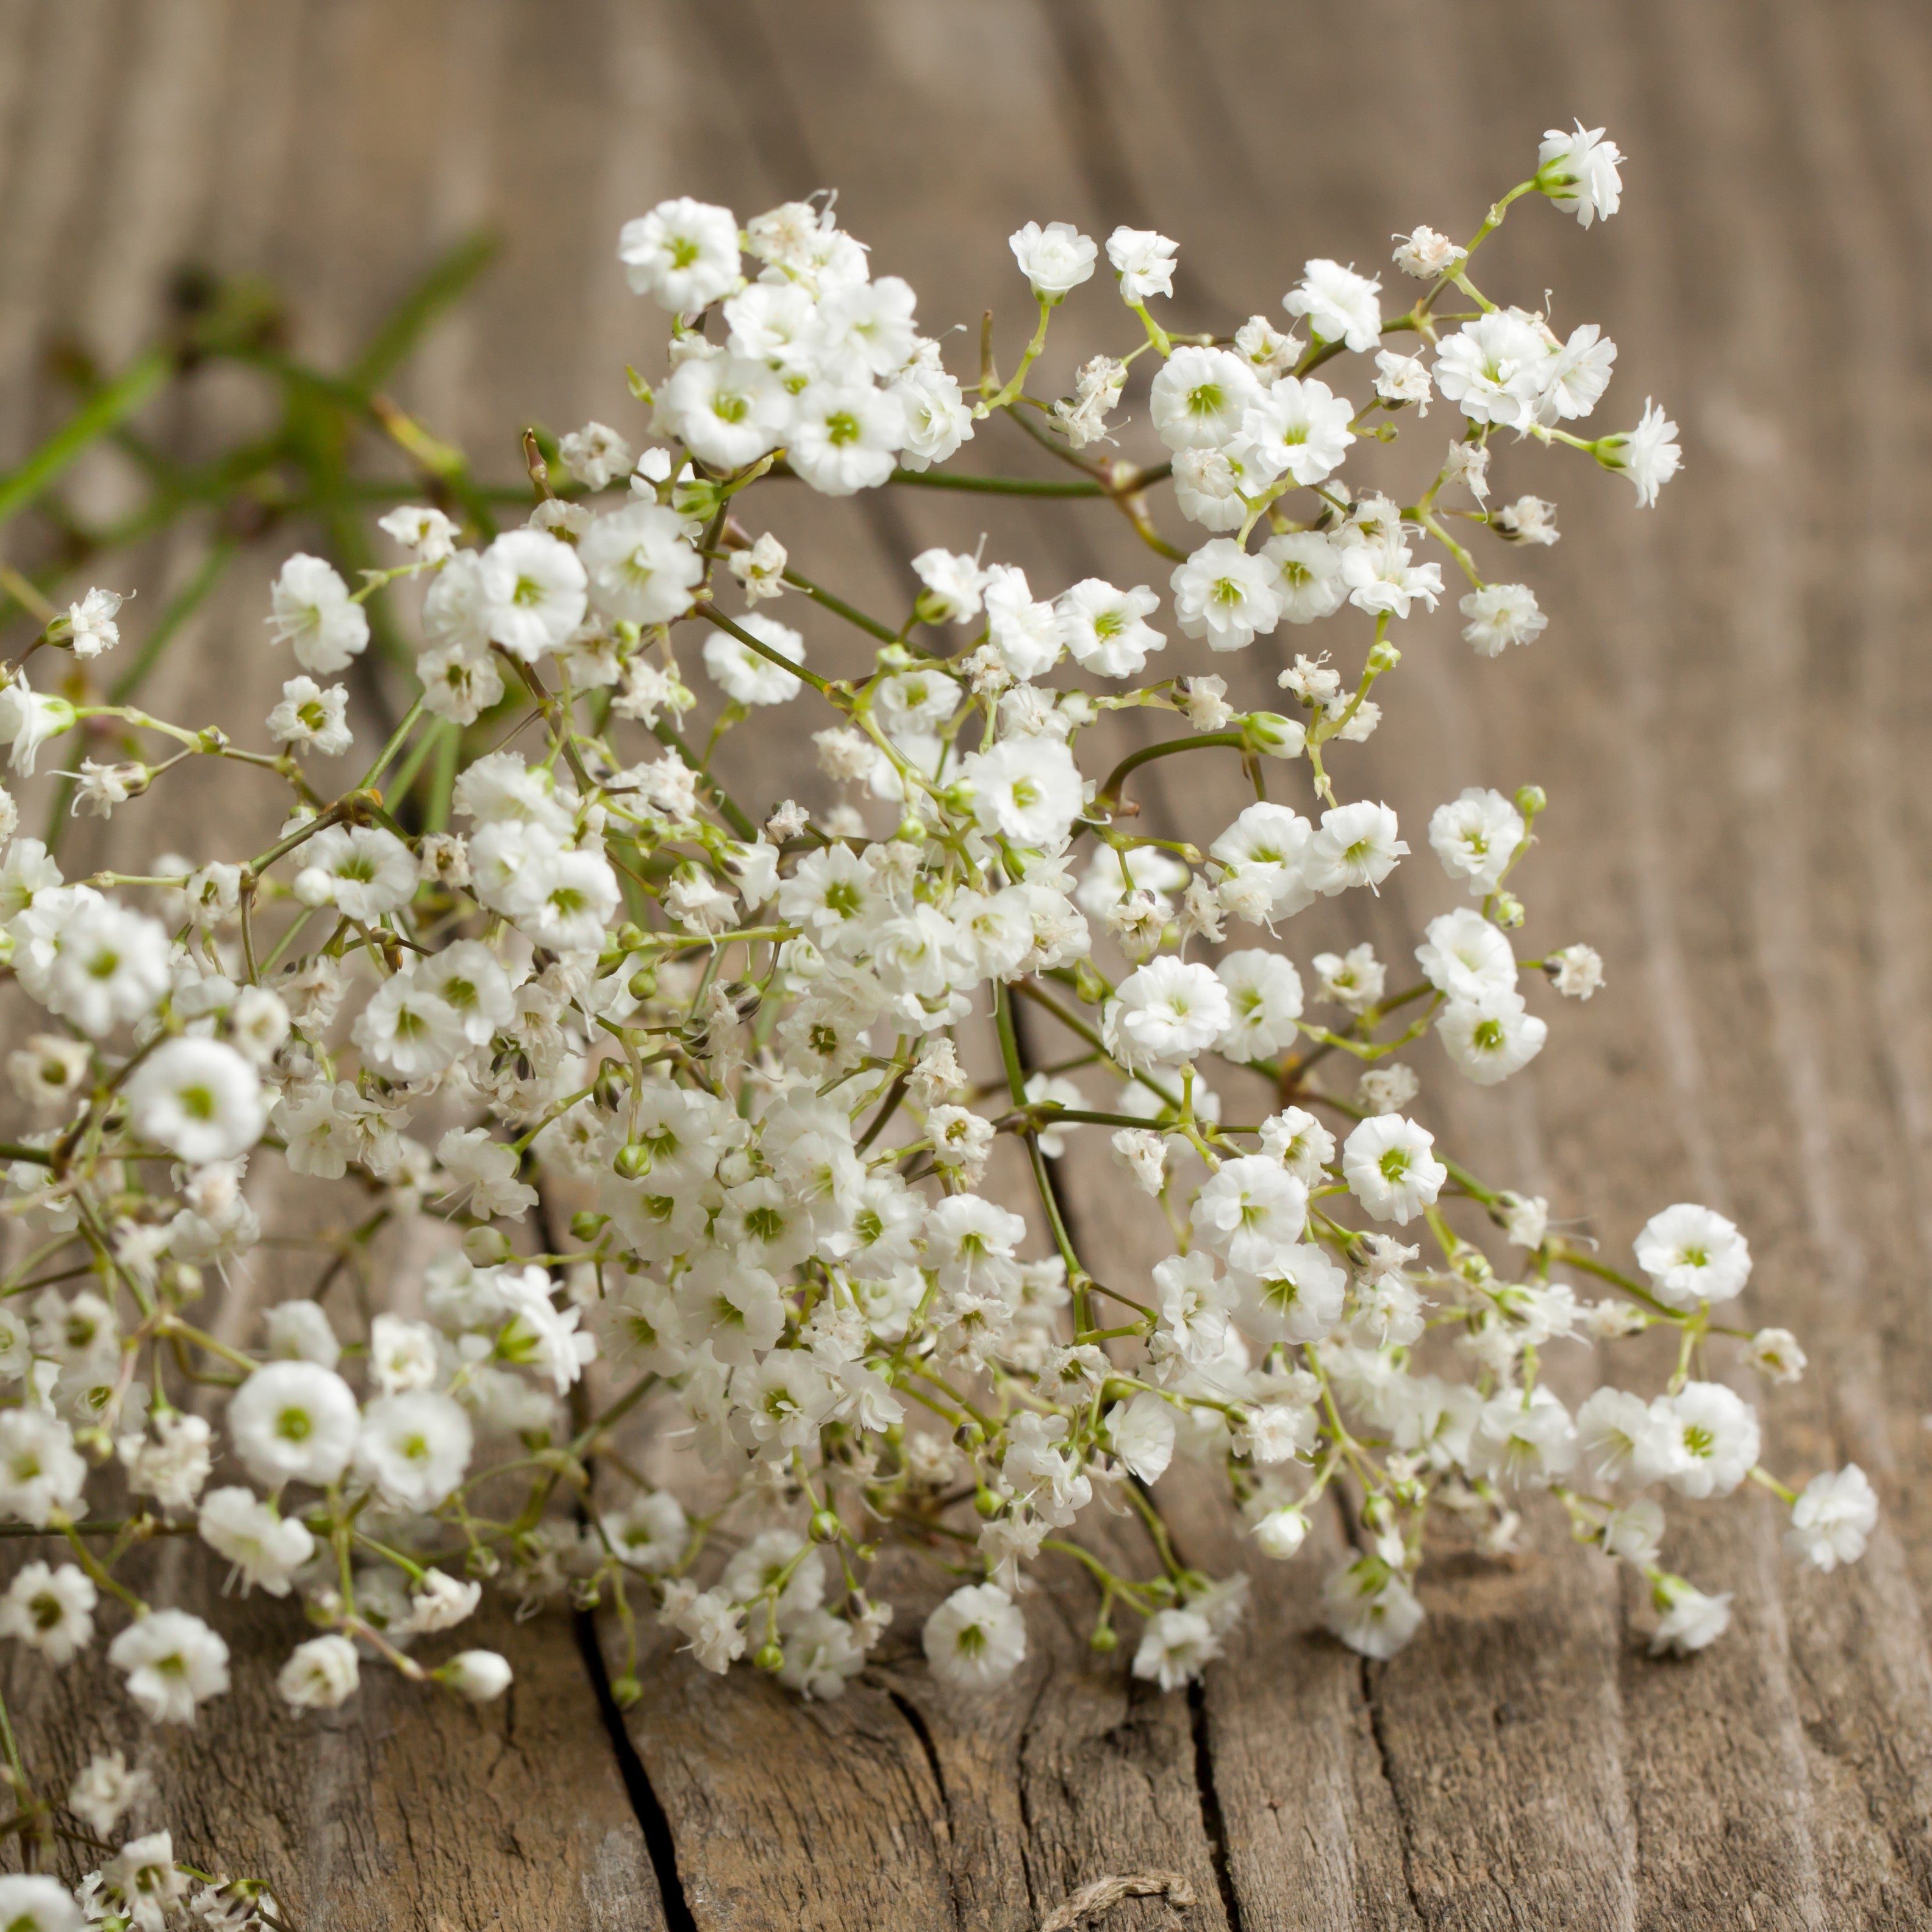 All You Need to Know about Baby's Breath Flowers